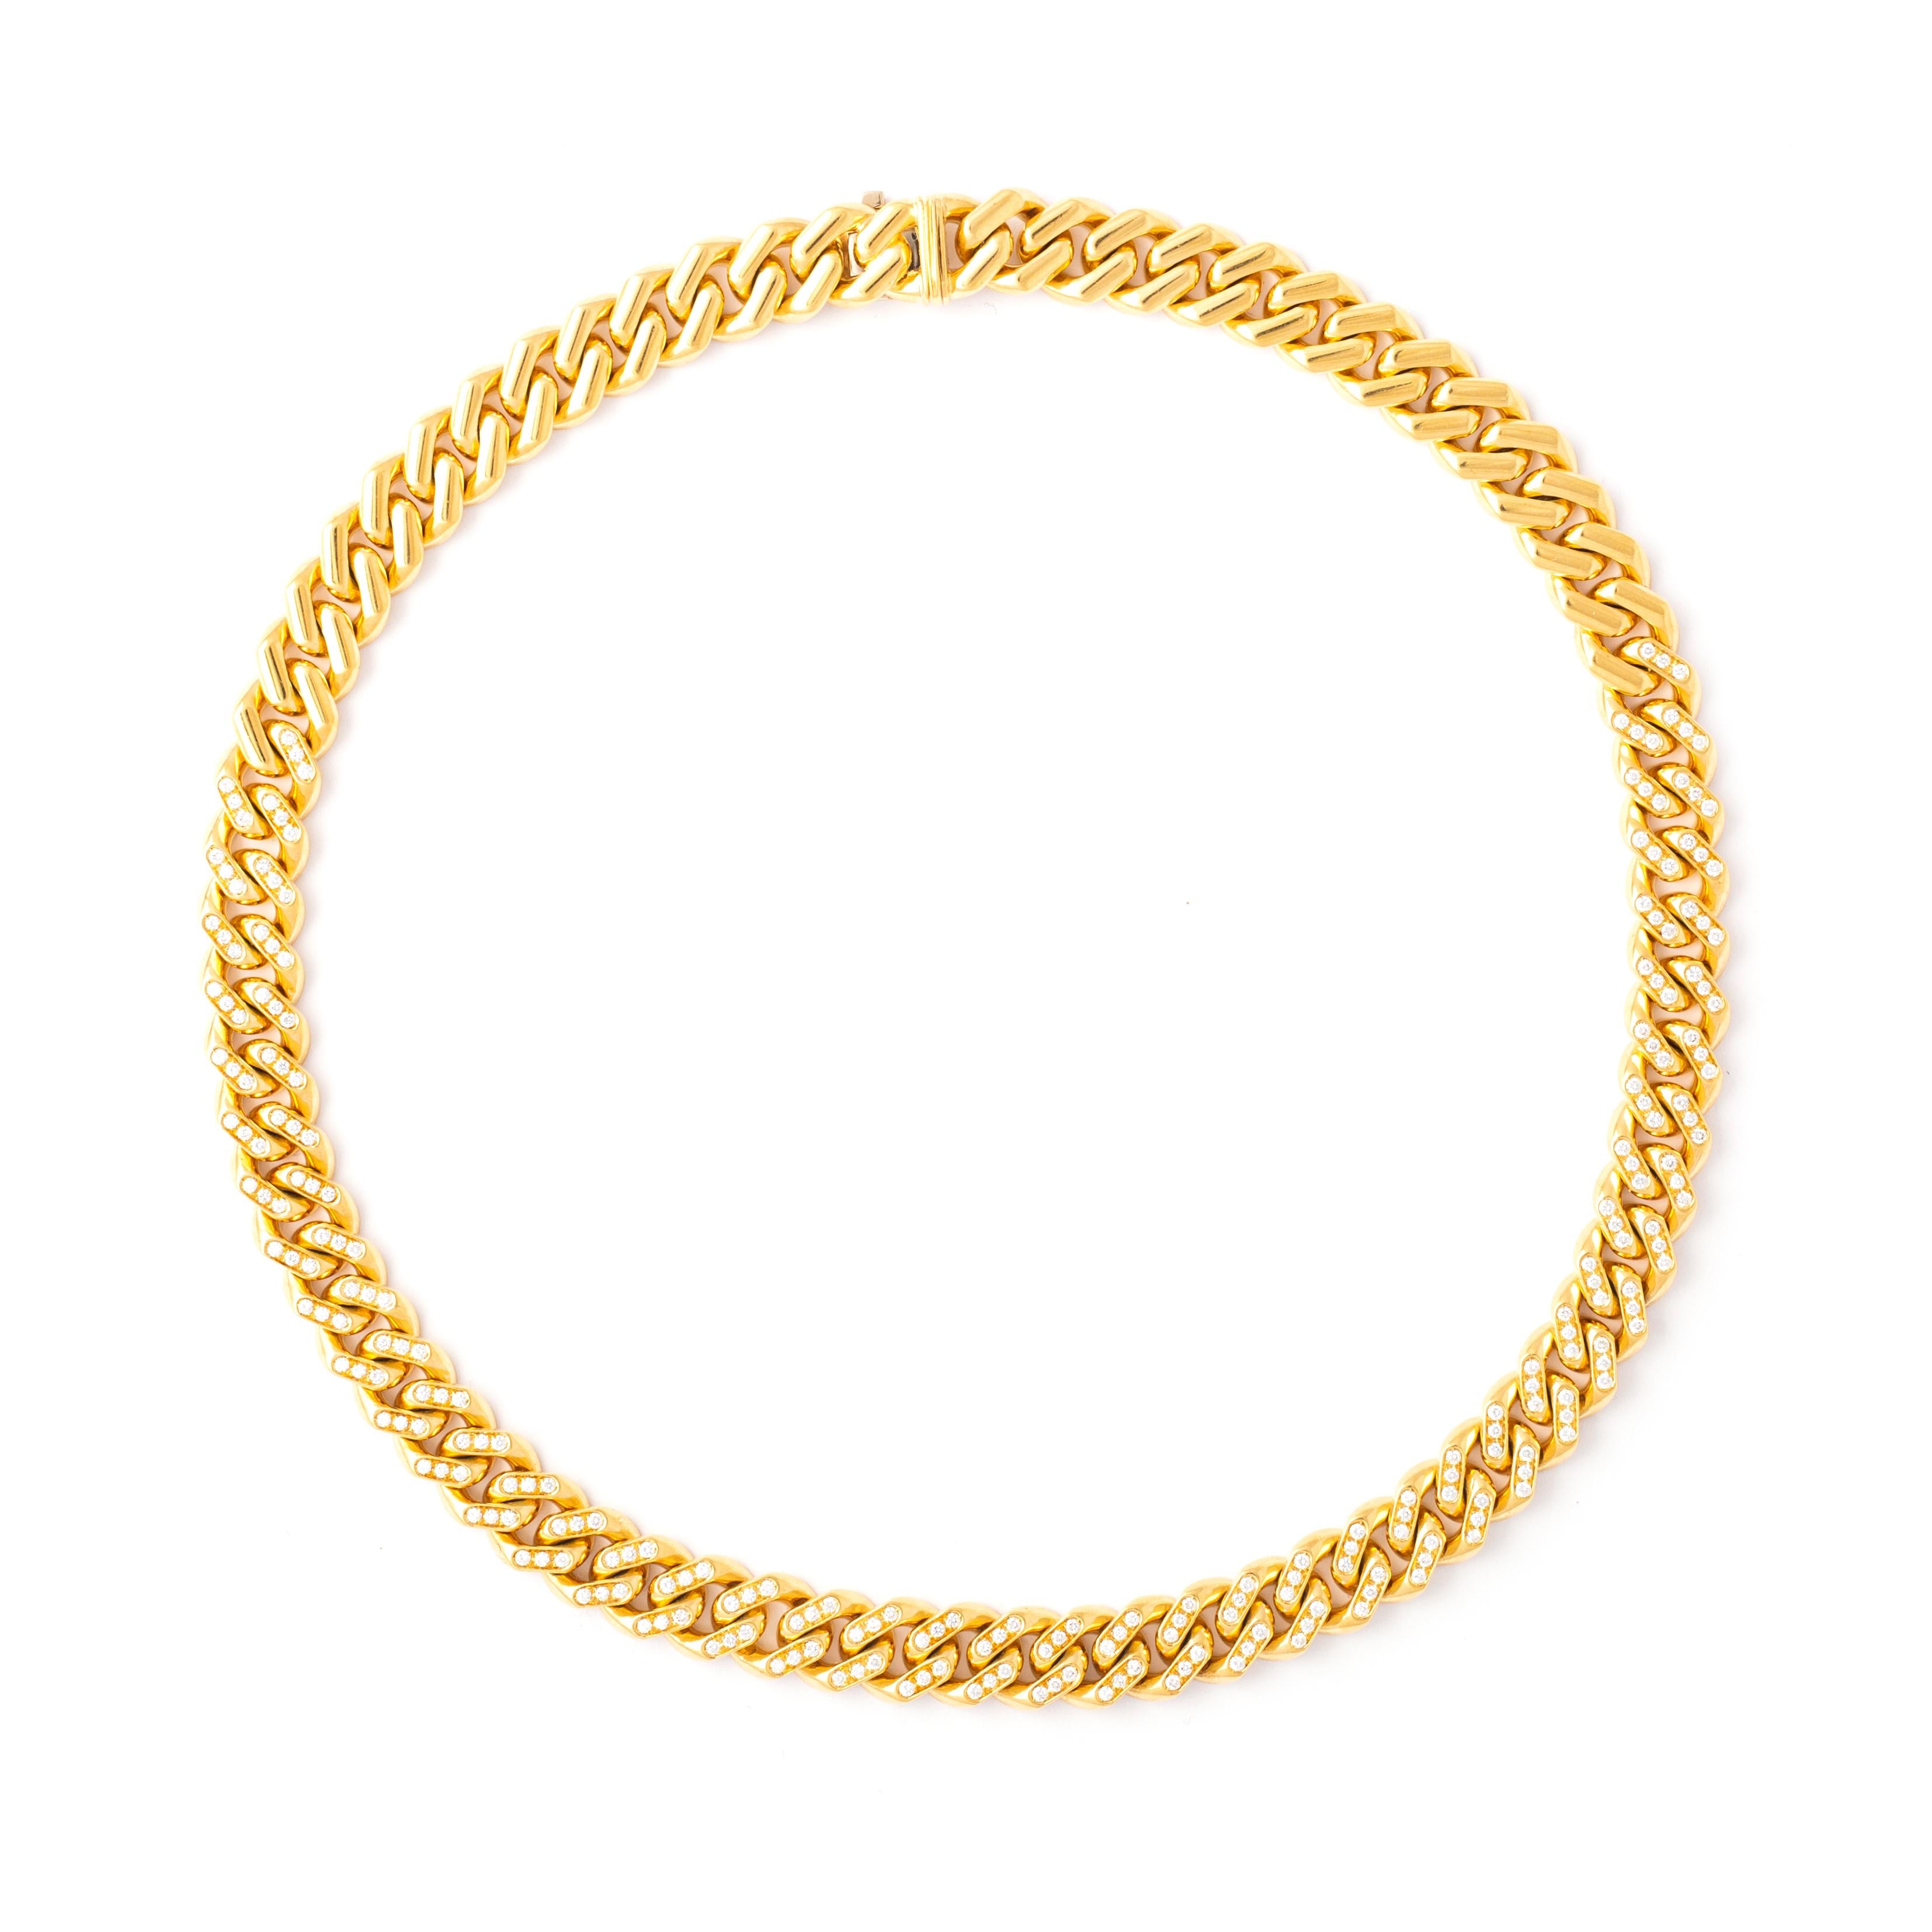 Necklace in 18kt yellow gold set with 258 diamonds 2.75 cts

Length: 43.00 centimeters (16.93 inches)

Total weight: 136.32 grams.

Width : 1.00 centimeters (0.39 inches)